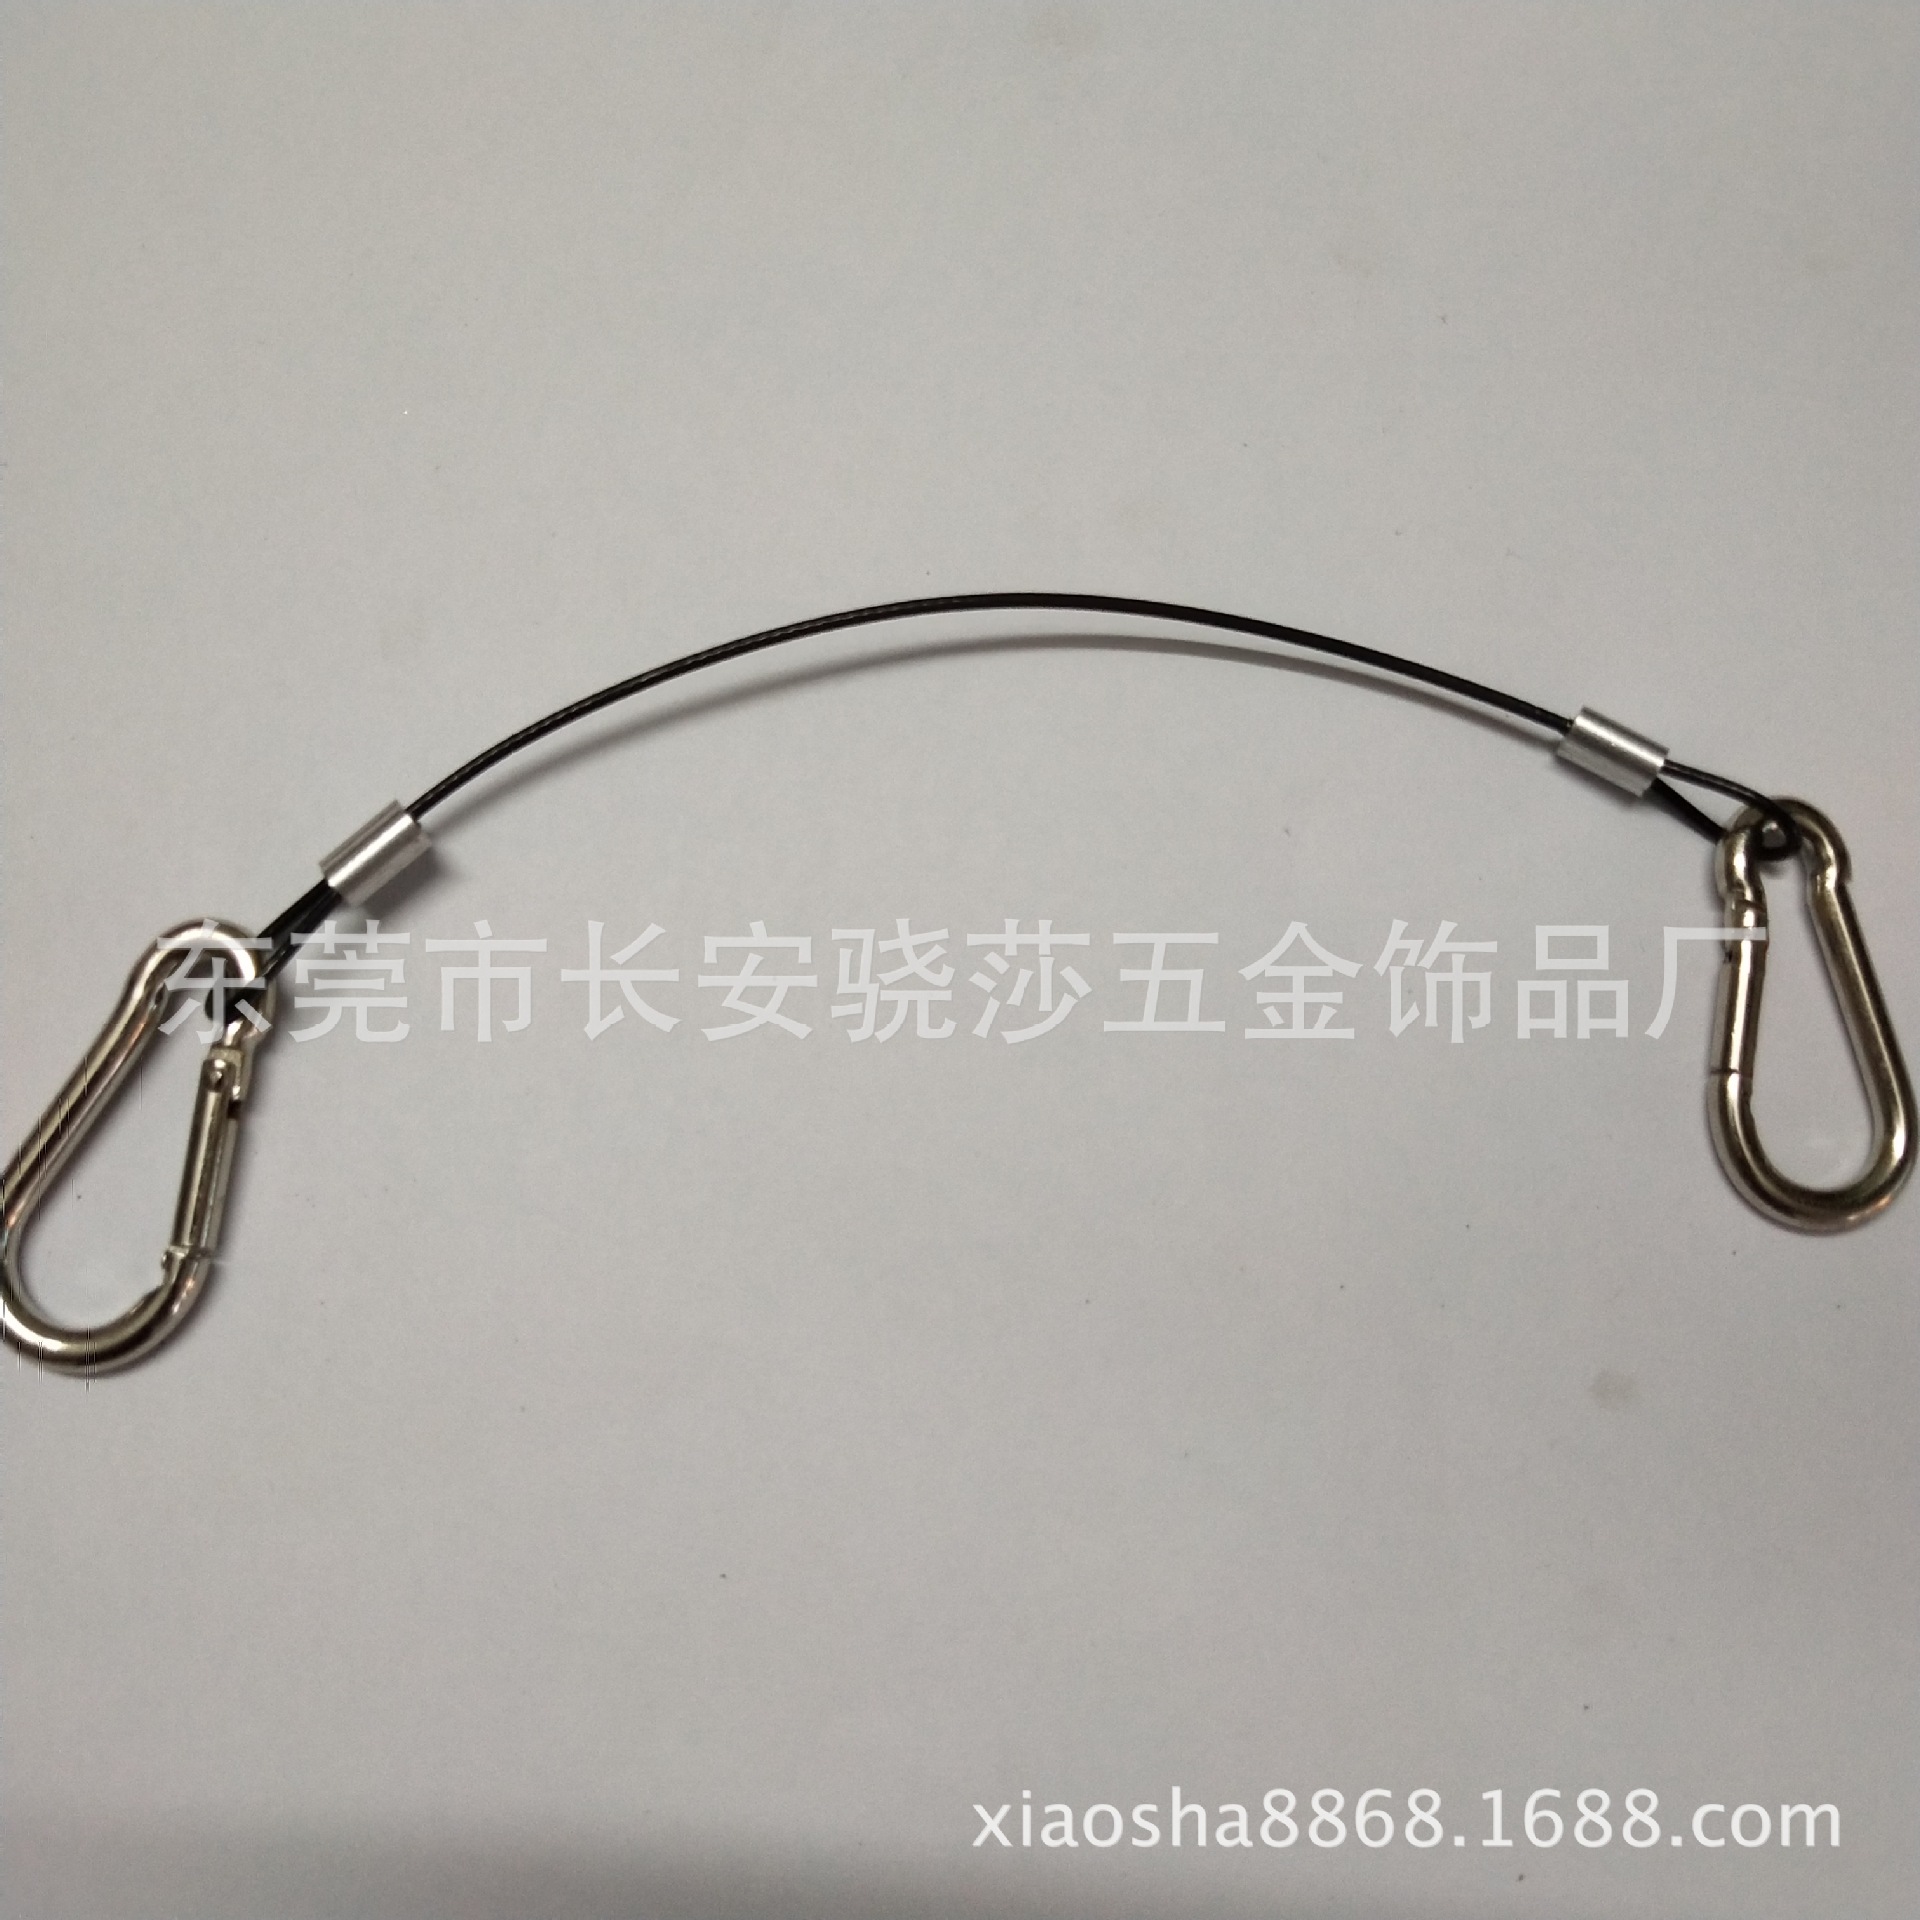 Produce Lighting Stainless steel a wire rope Sling Aluminum sleeve Suppress Rigging Sling Requirement customized